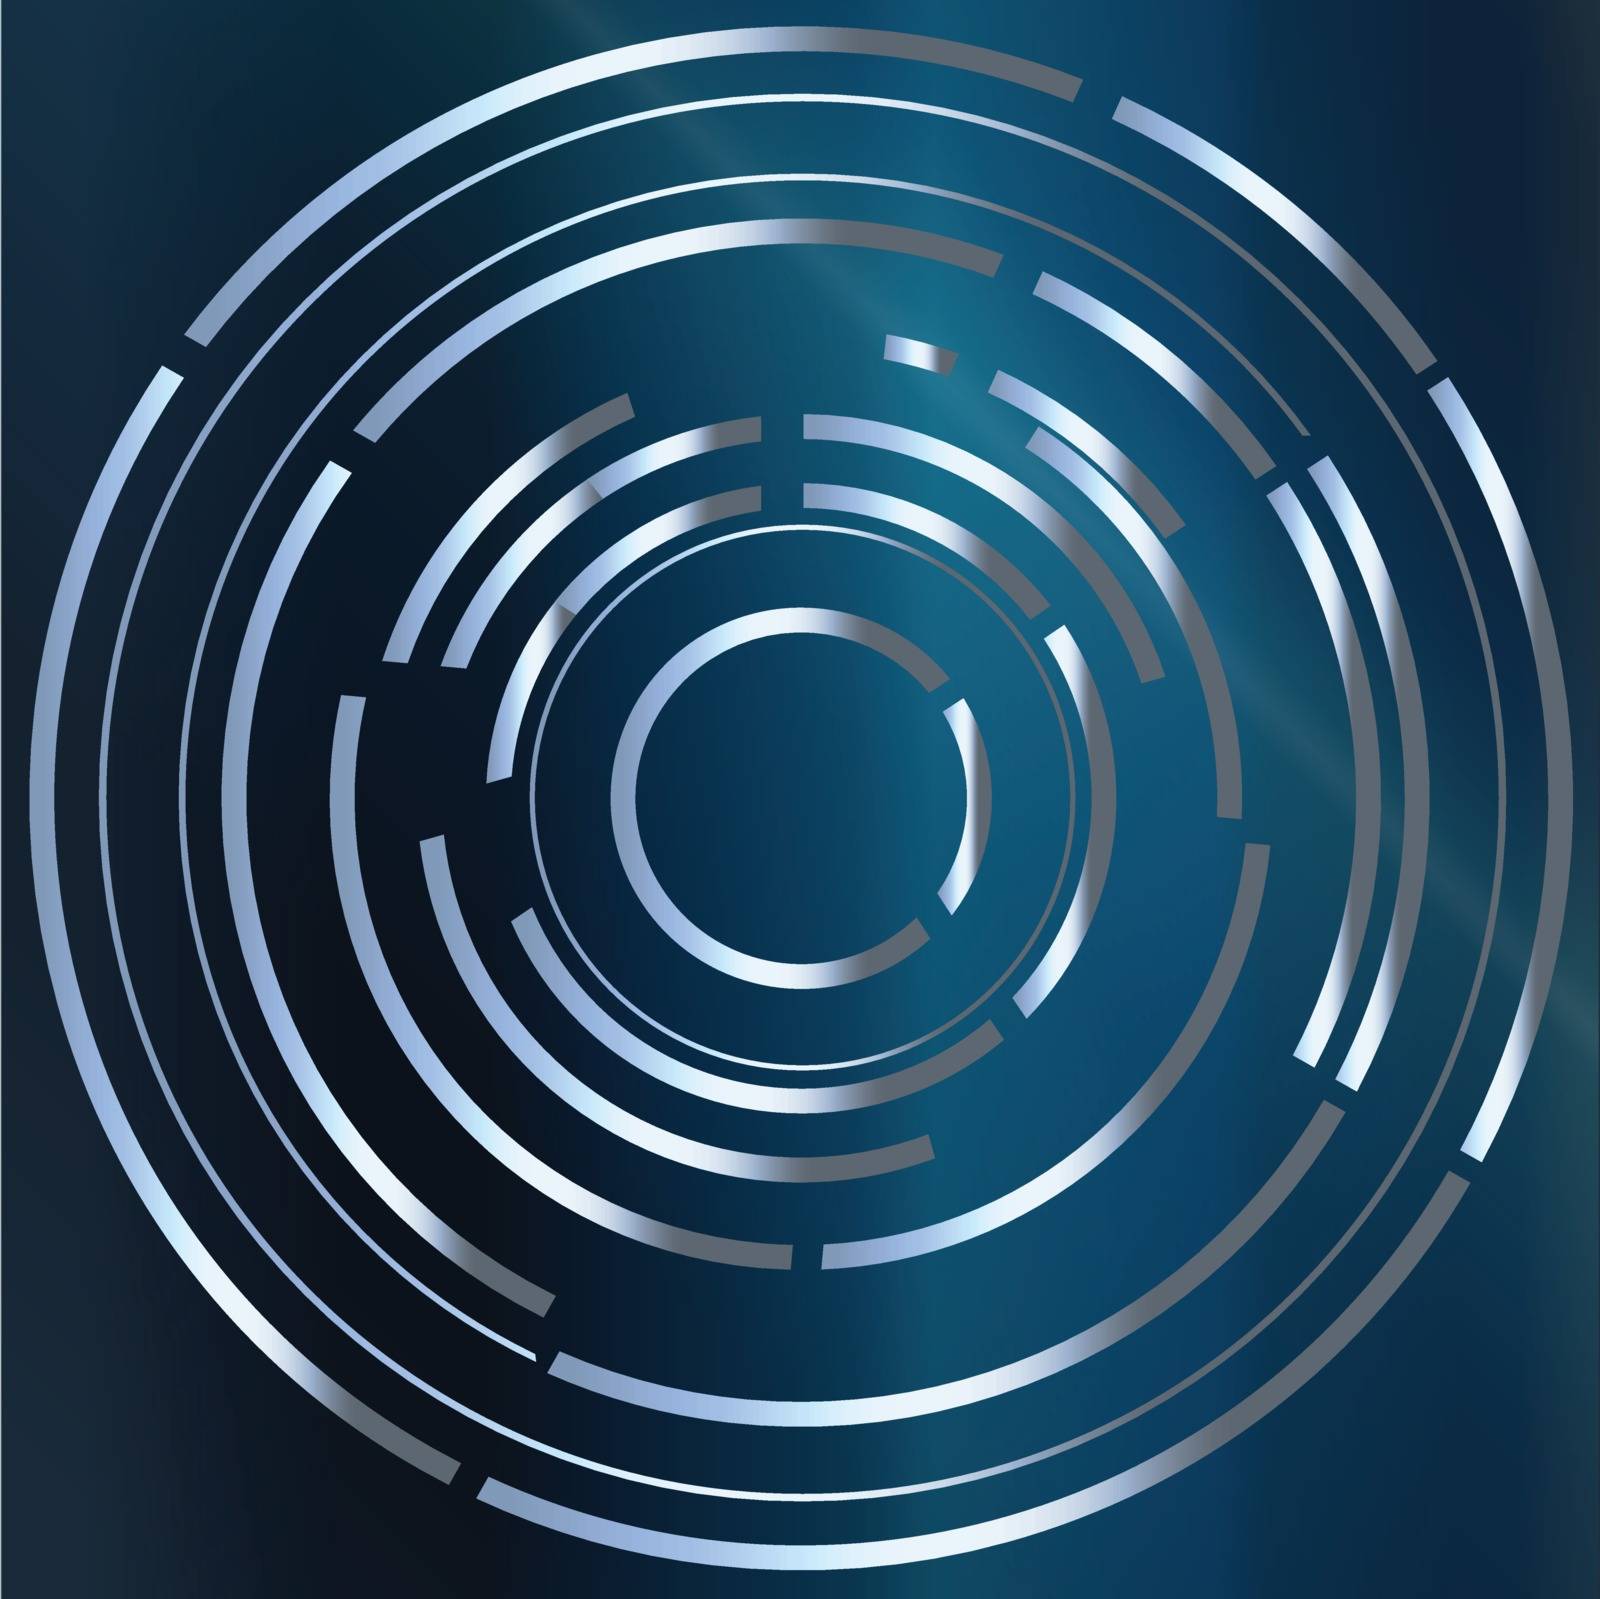 A circular maize style image over a blue metal background